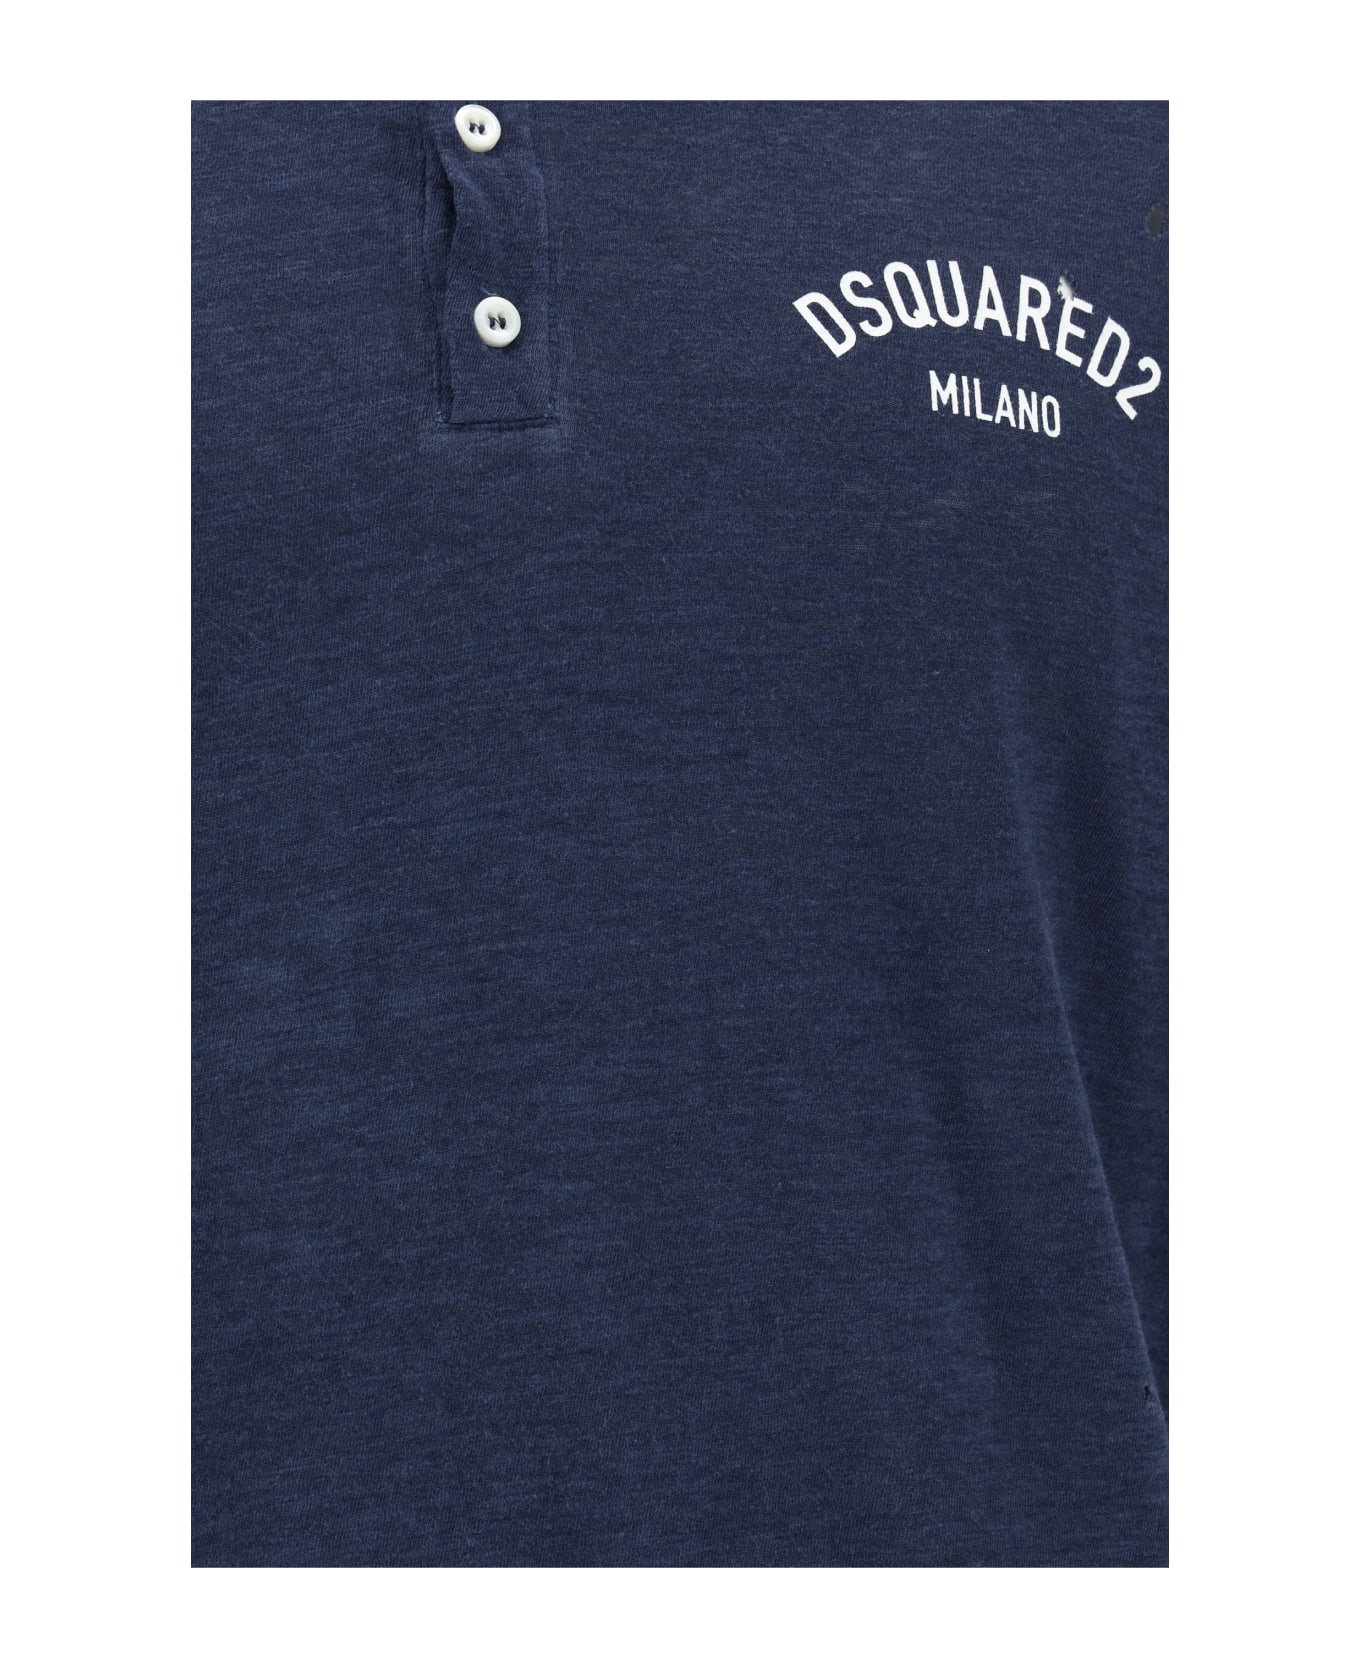 Dsquared2 Polo Shirt - Navy Blue